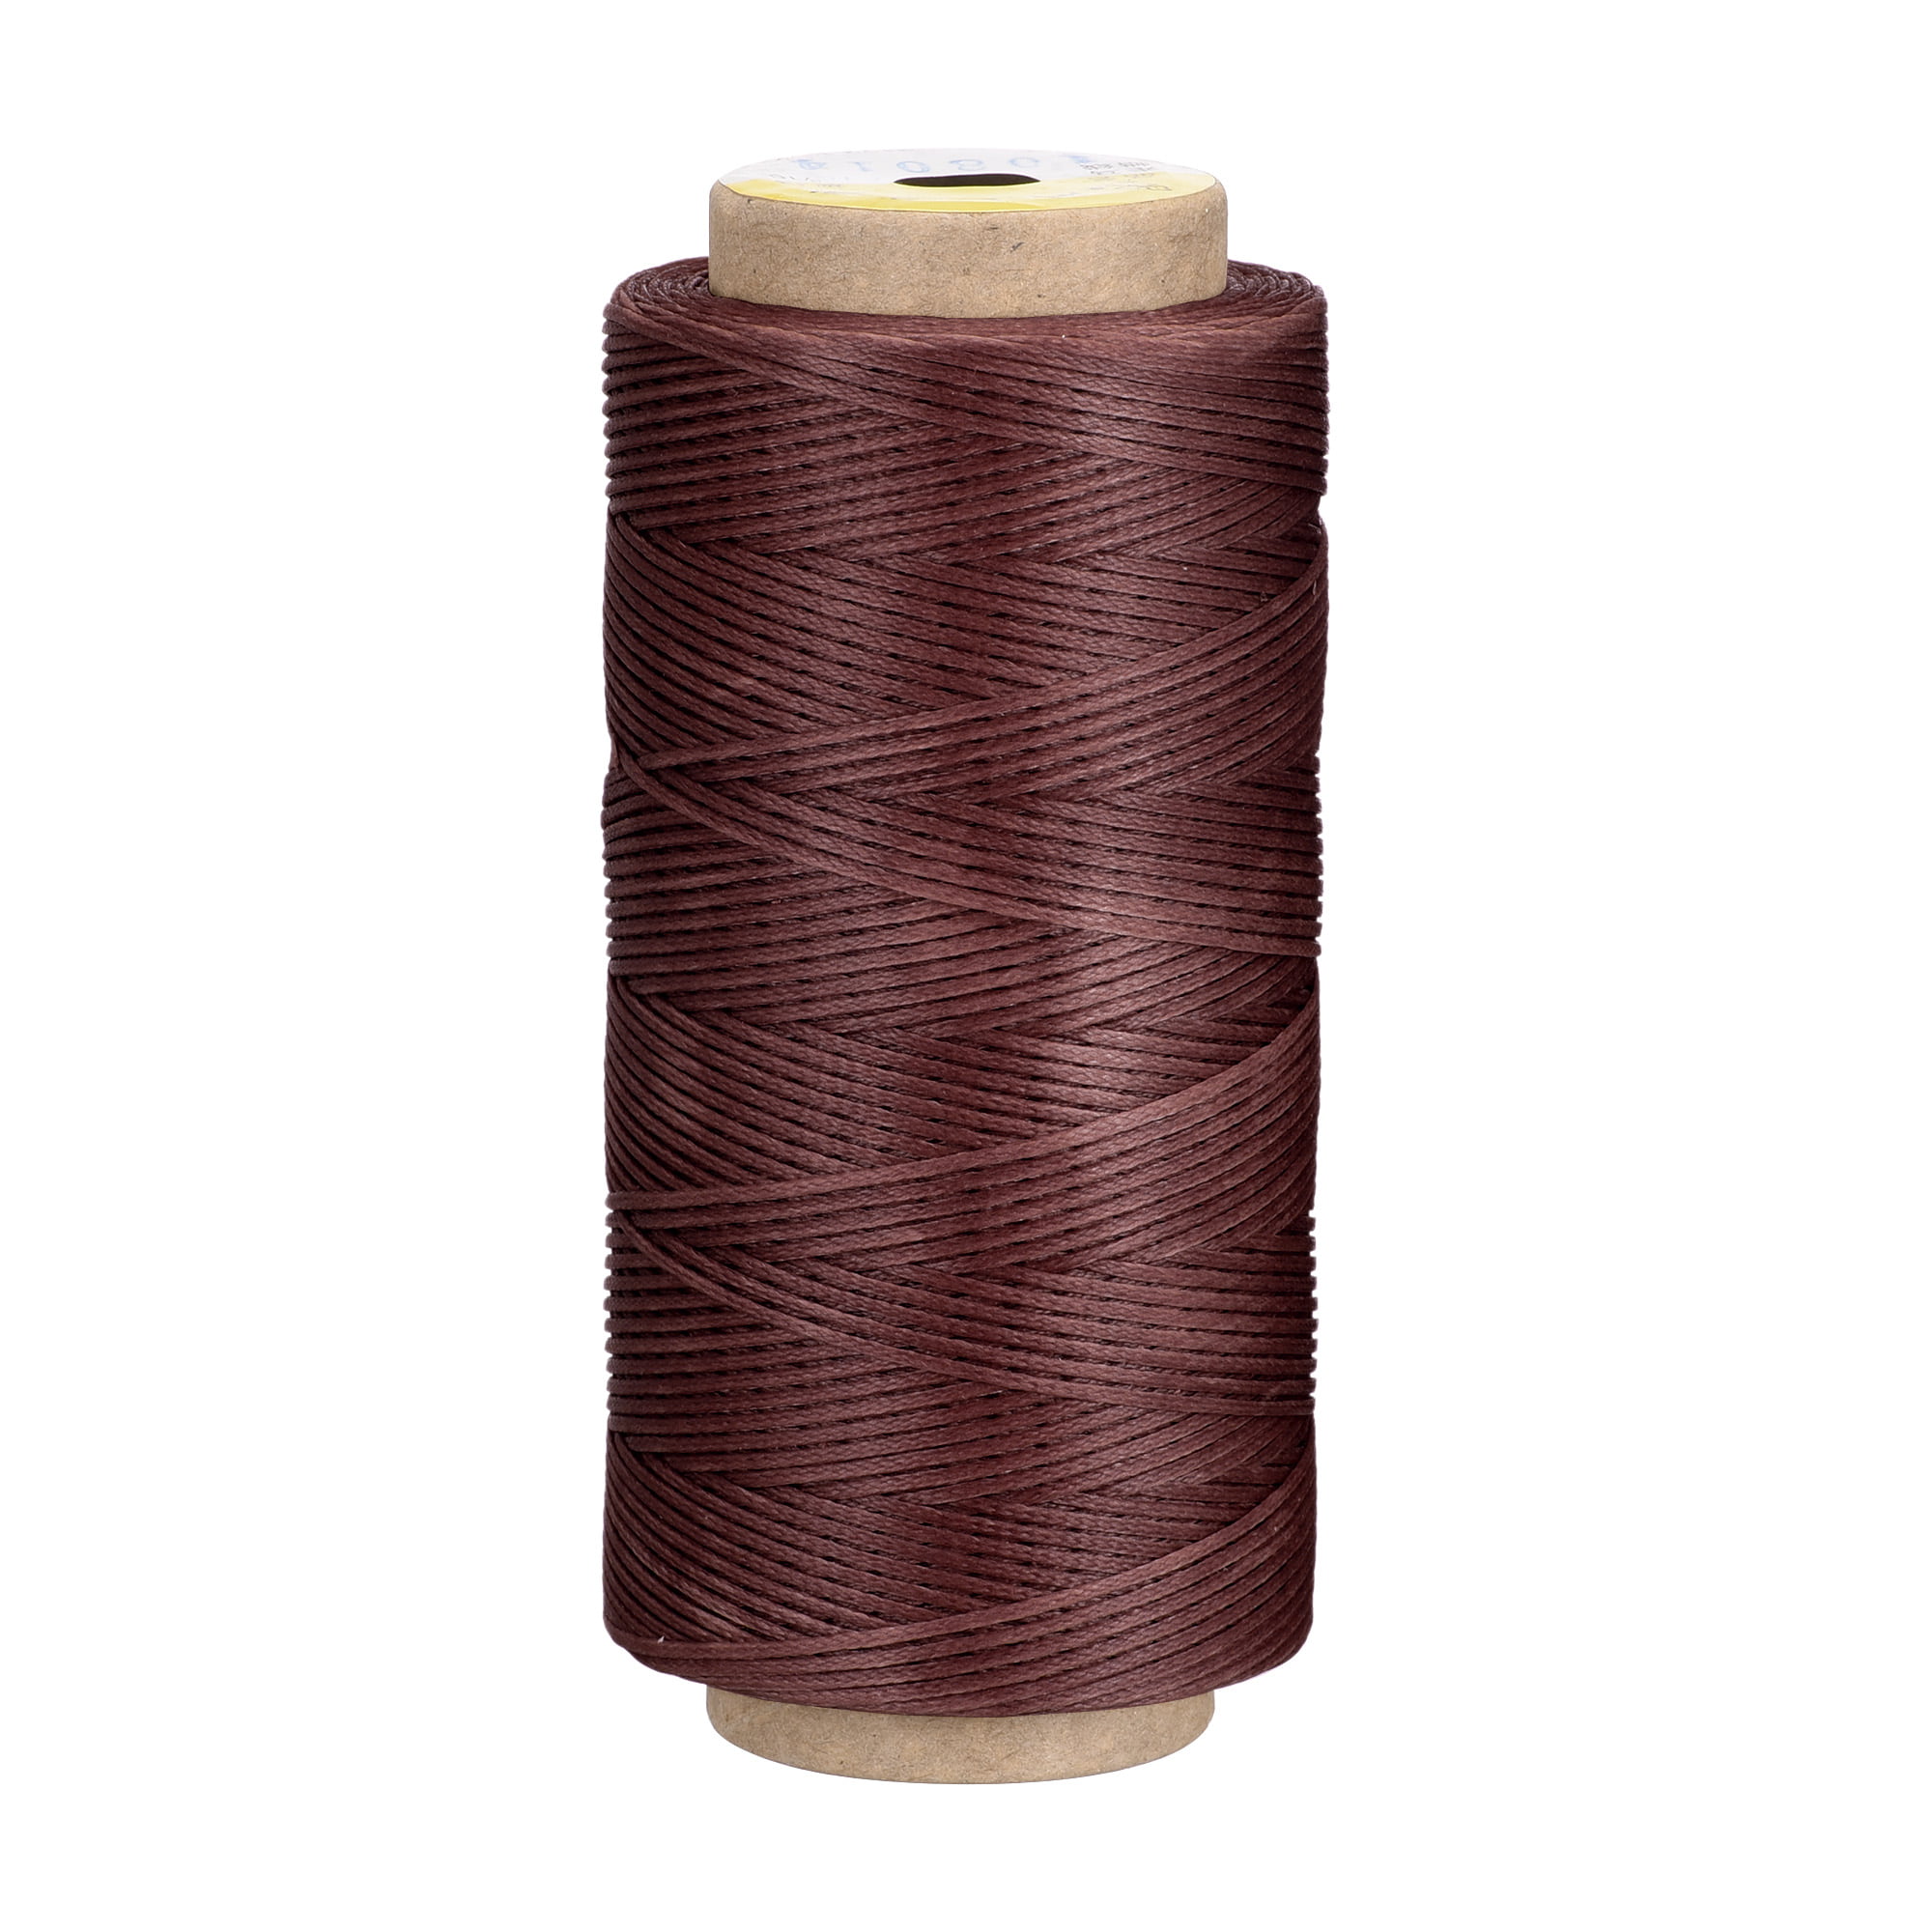 Uxcell 4'' Sewing Stitching Waxed Thread Cord Leather Dark Brown 1pcs